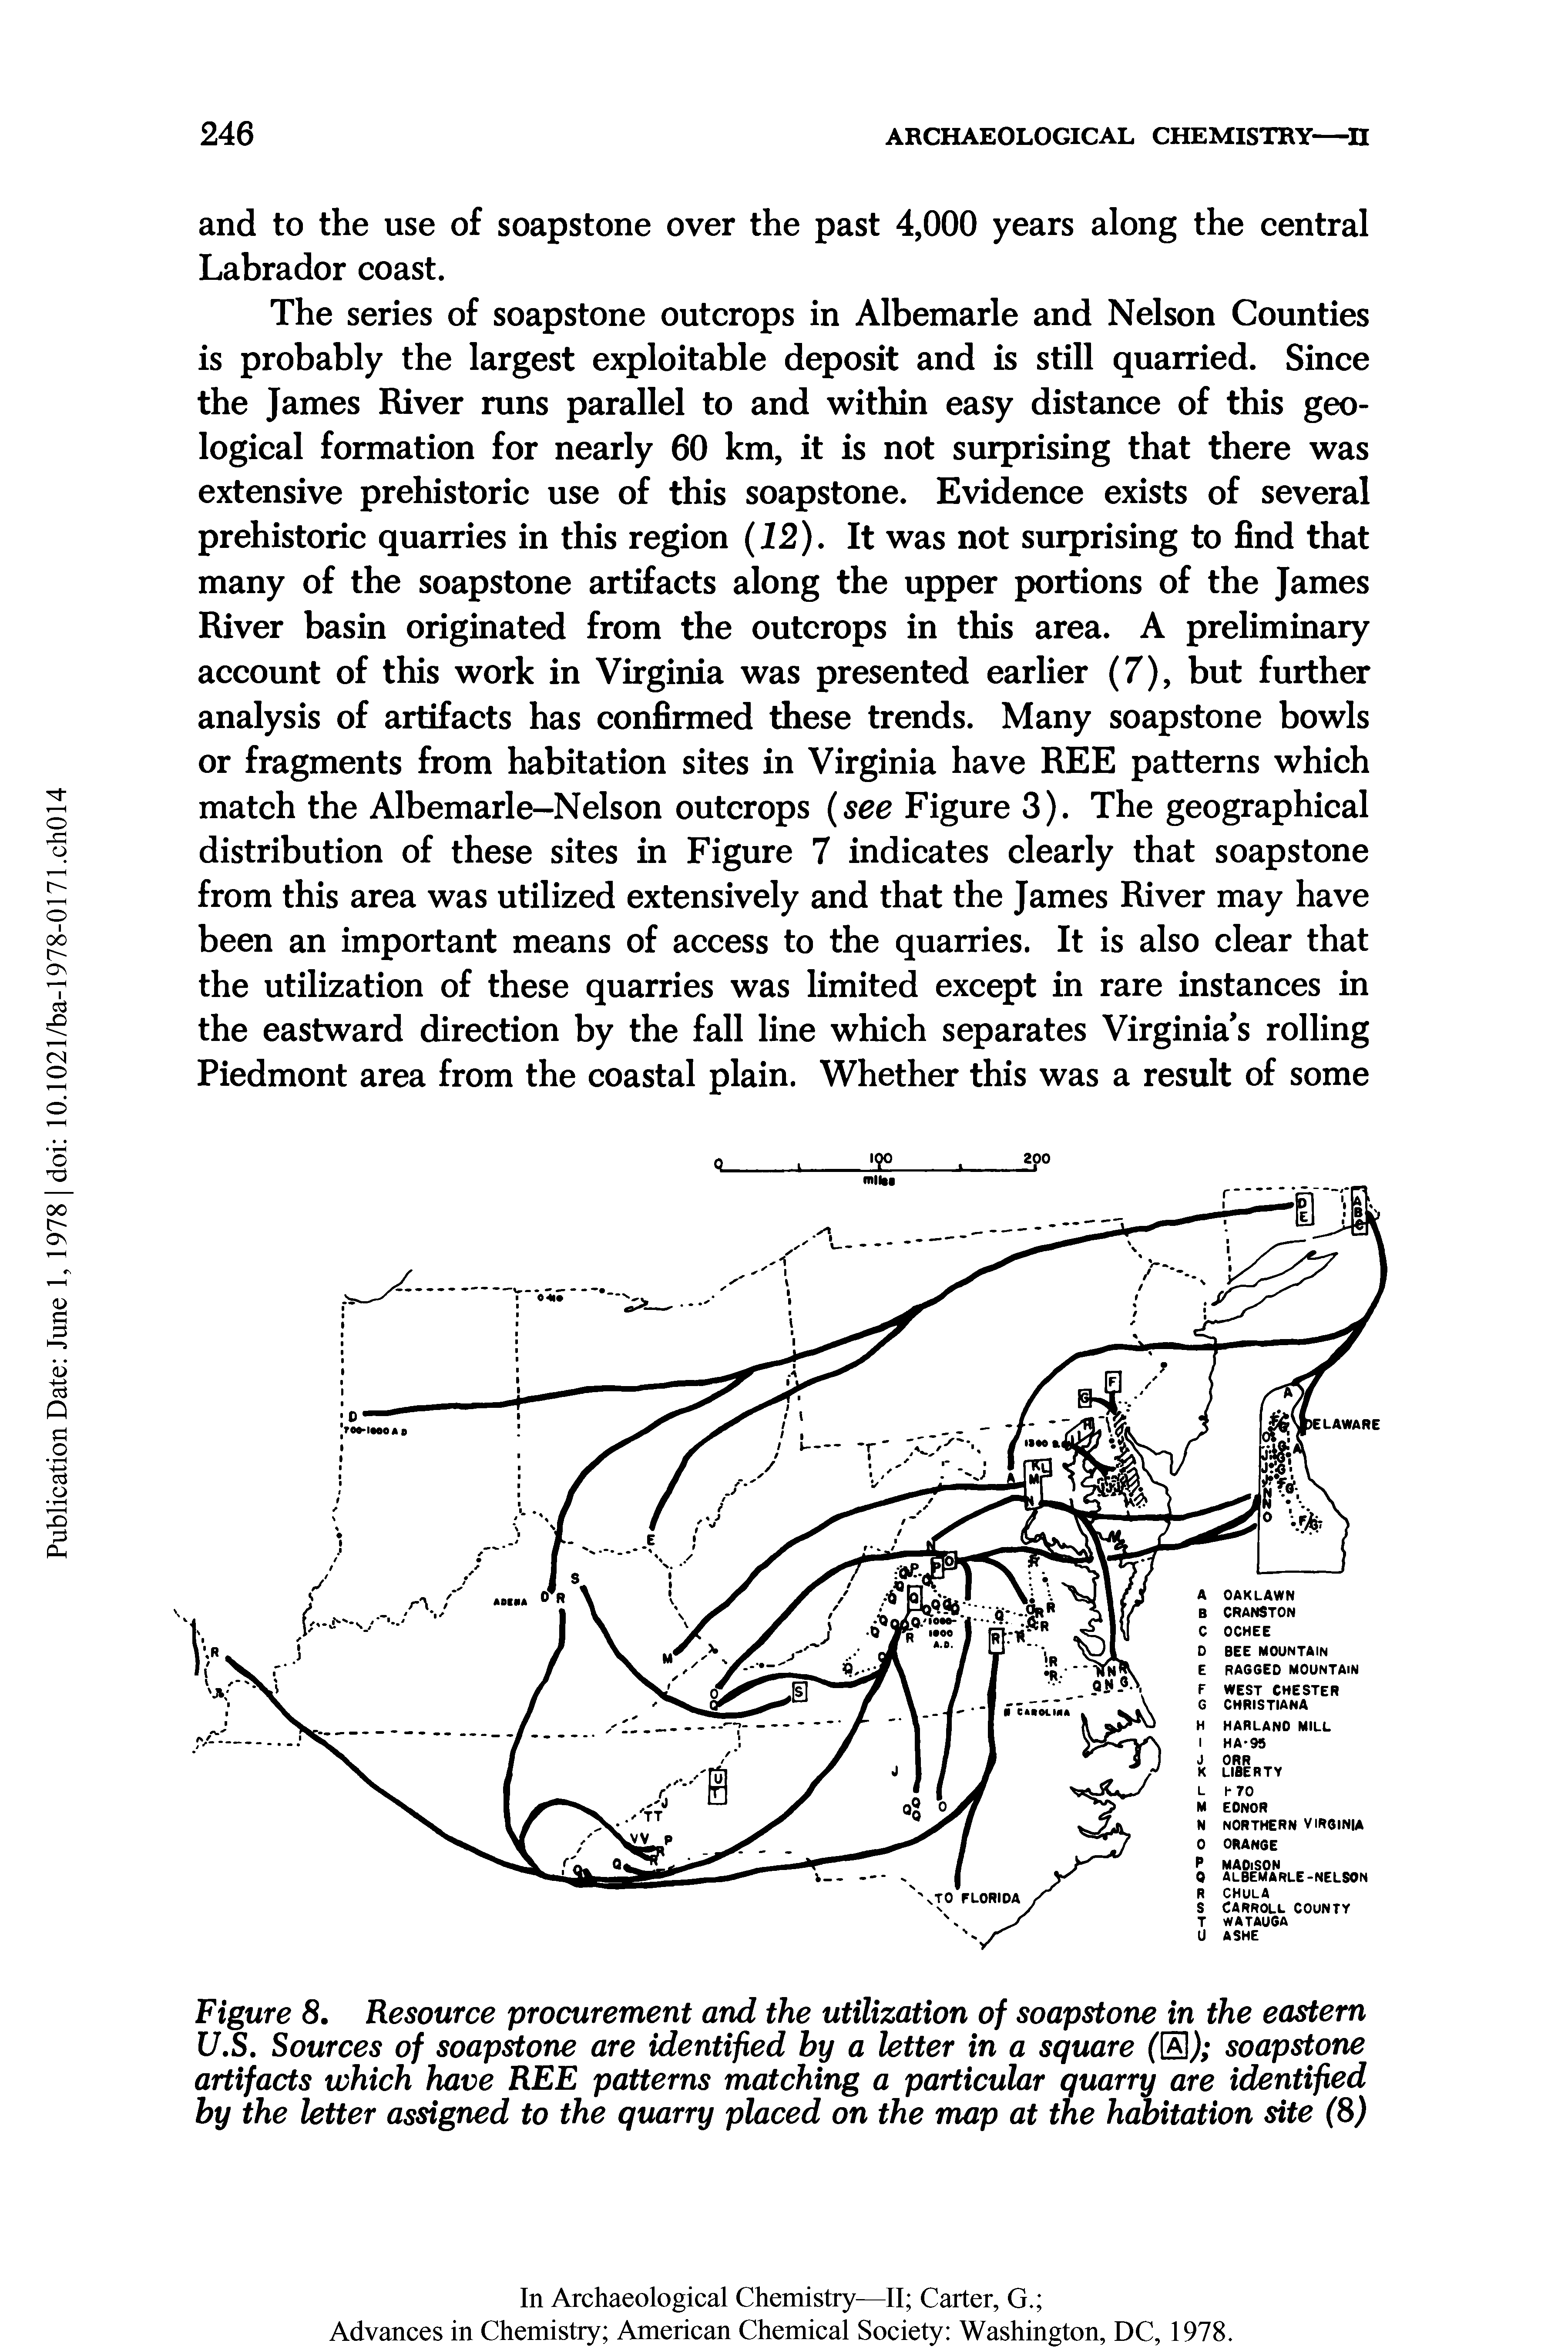 Figure 8, Resource procurement and the utilization of soapstone in the eastern U,S, Sources of soapstone are identified by a letter in a square (0) soapstone artifacts which have REE patterns matching a particular quarry are identified by the letter assigned to the quarry placed on the map at the habitation site (8)...